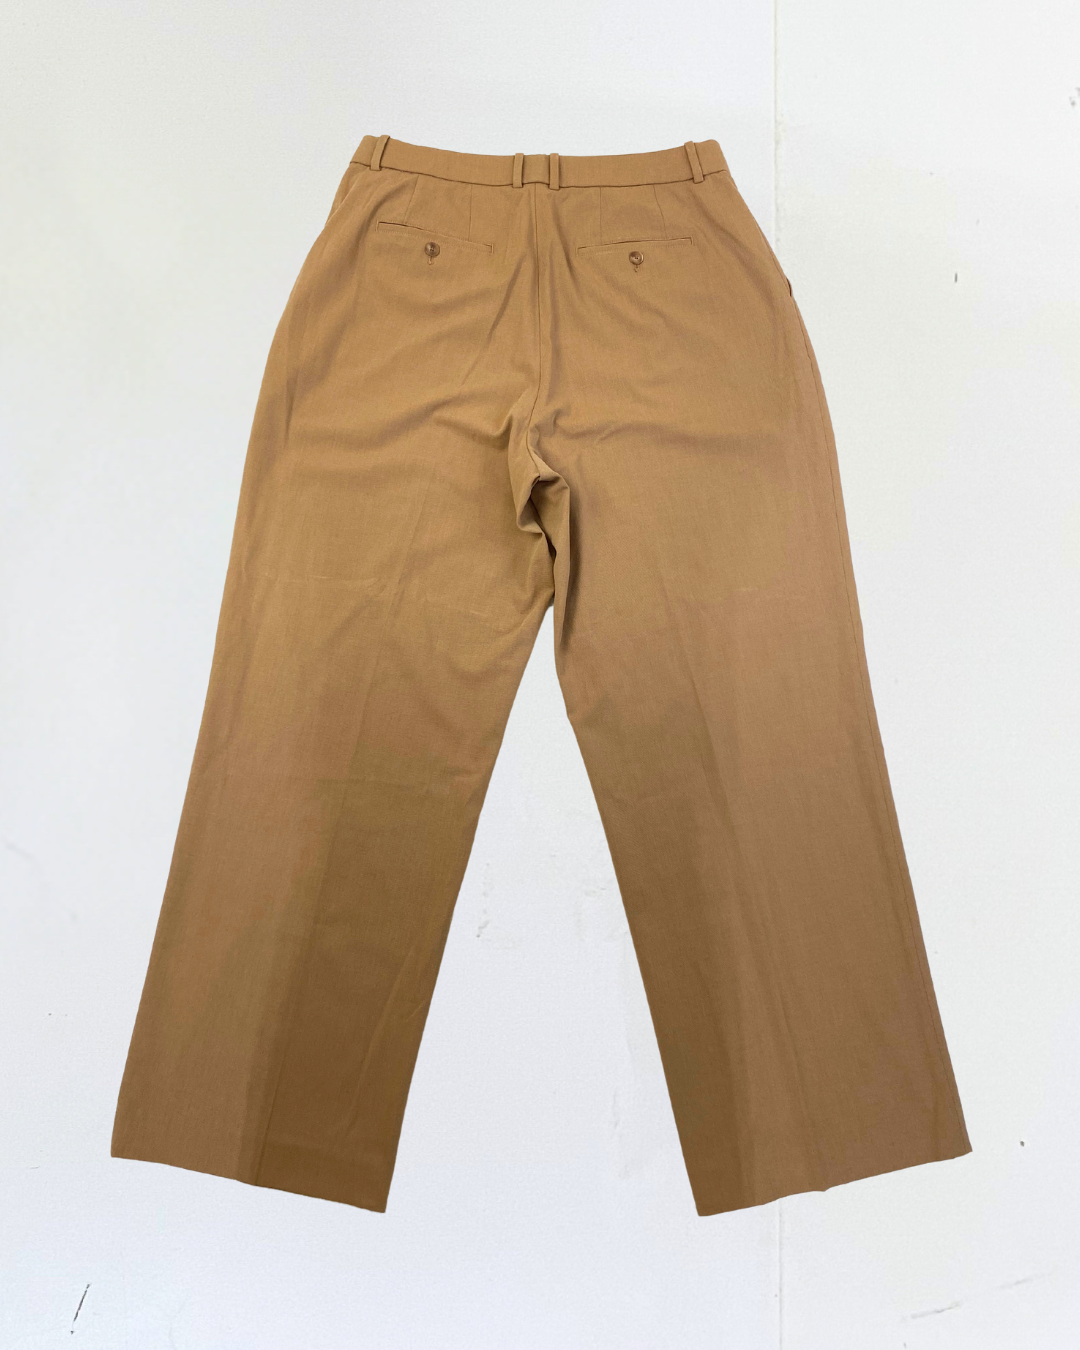 Uniqlo Tailored Camel Trousers Size XL